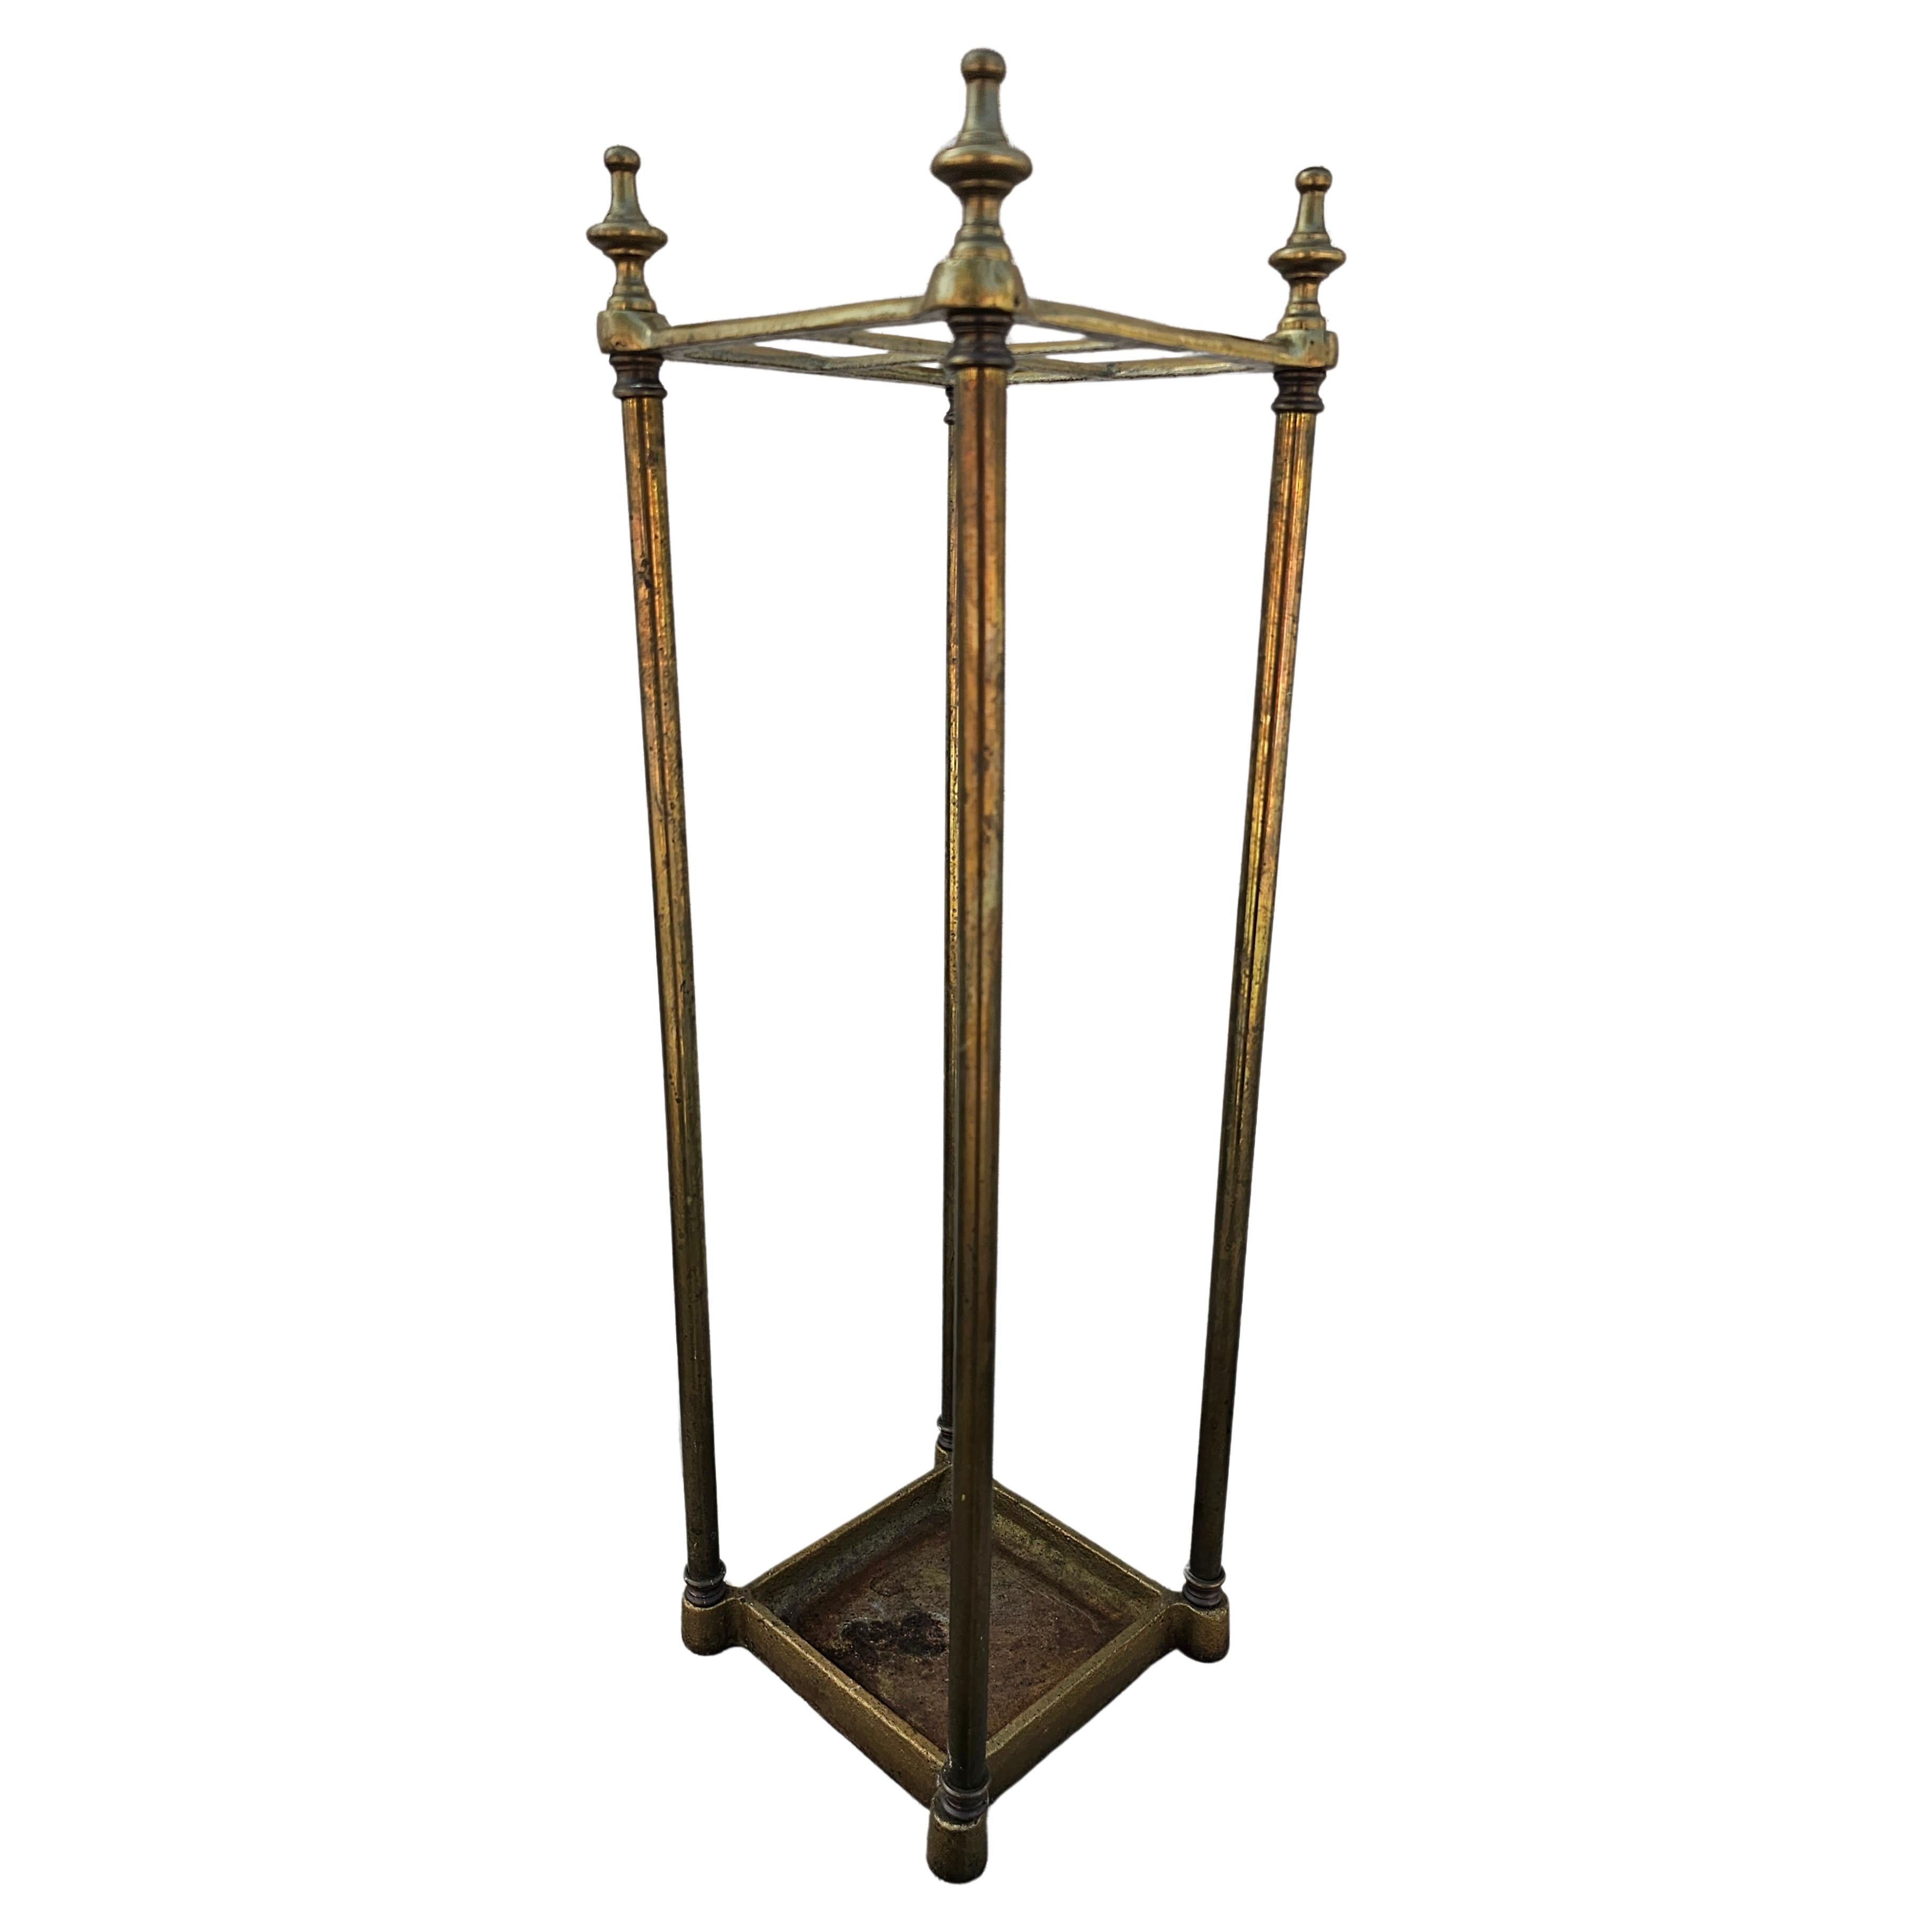 A mid Century sol8d brass Federal Style umbrella Stand. Measures 8